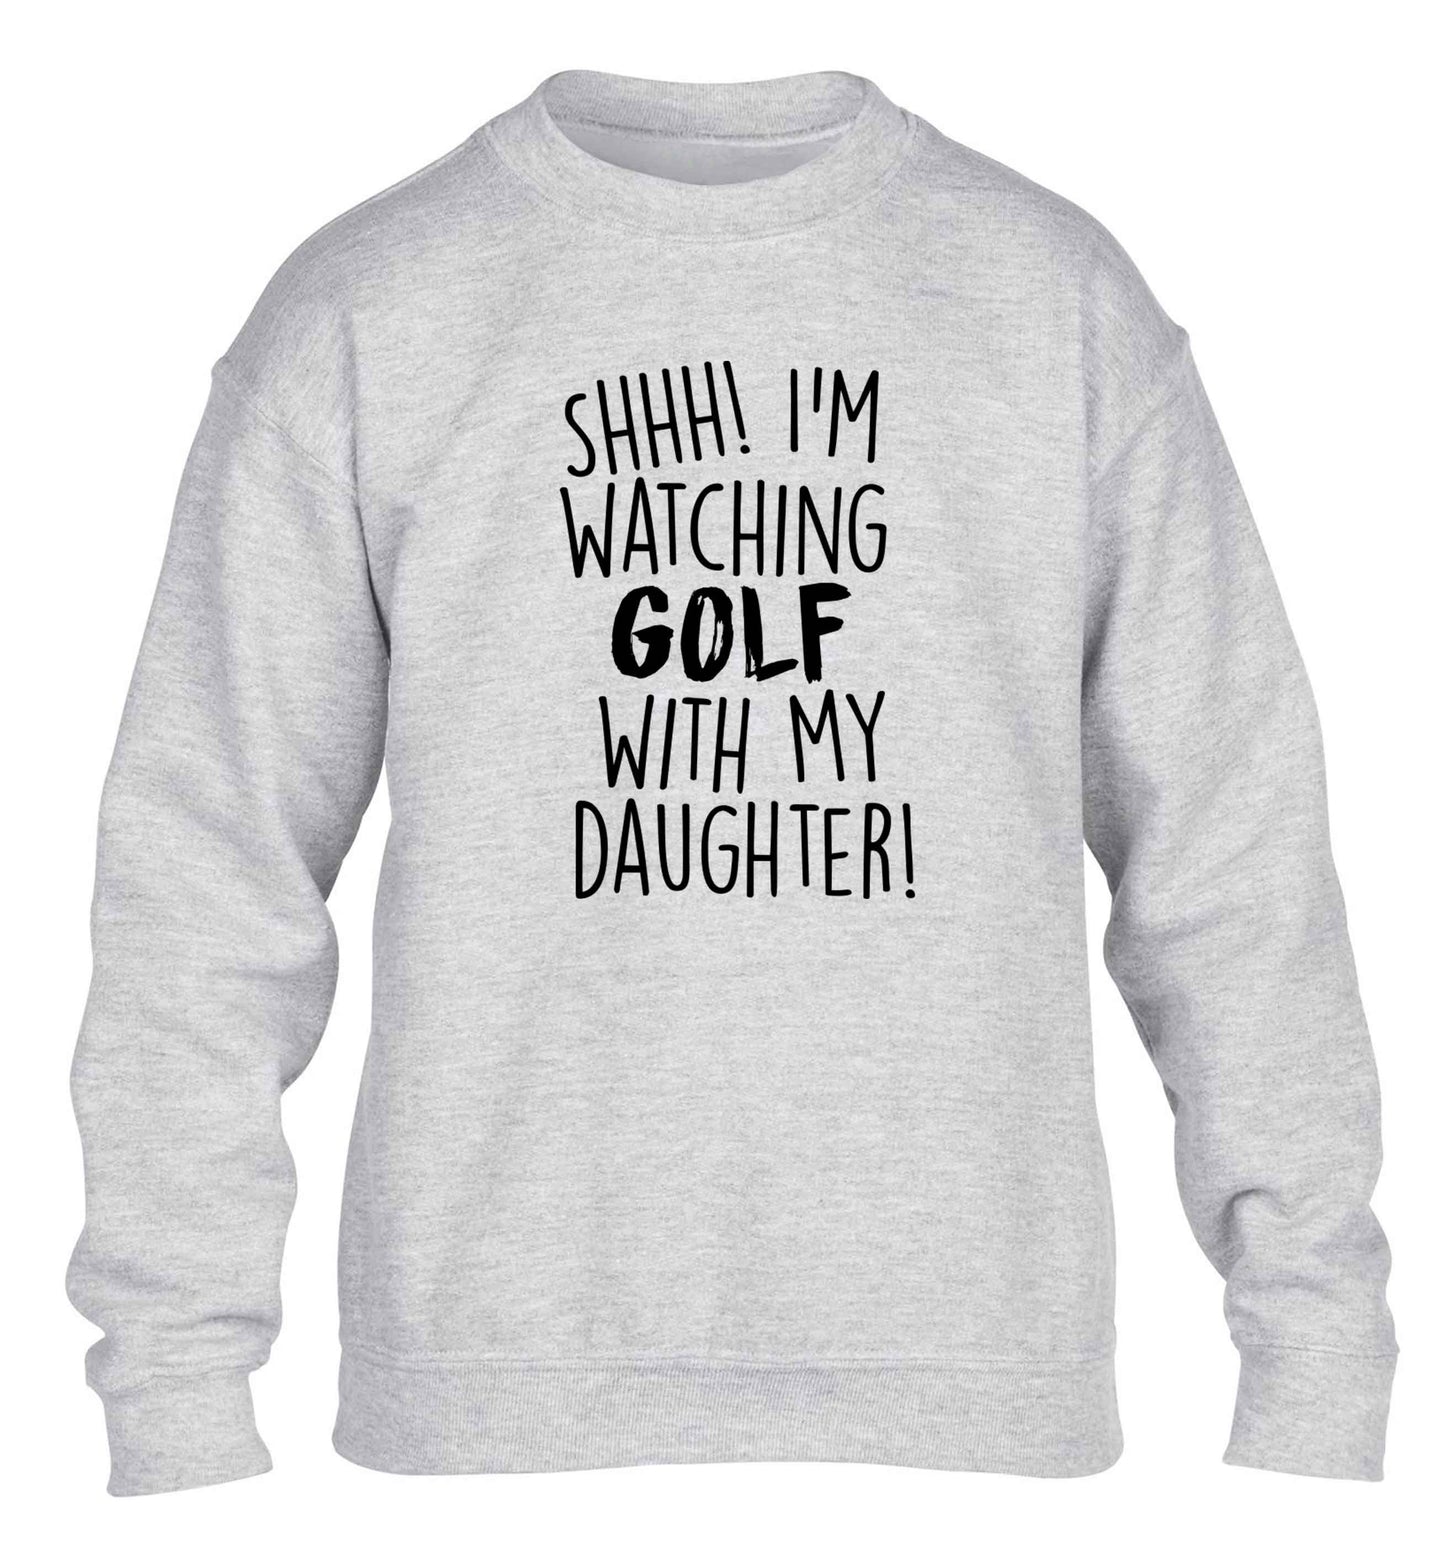 Shh I'm watching golf with my daughter children's grey sweater 12-13 Years